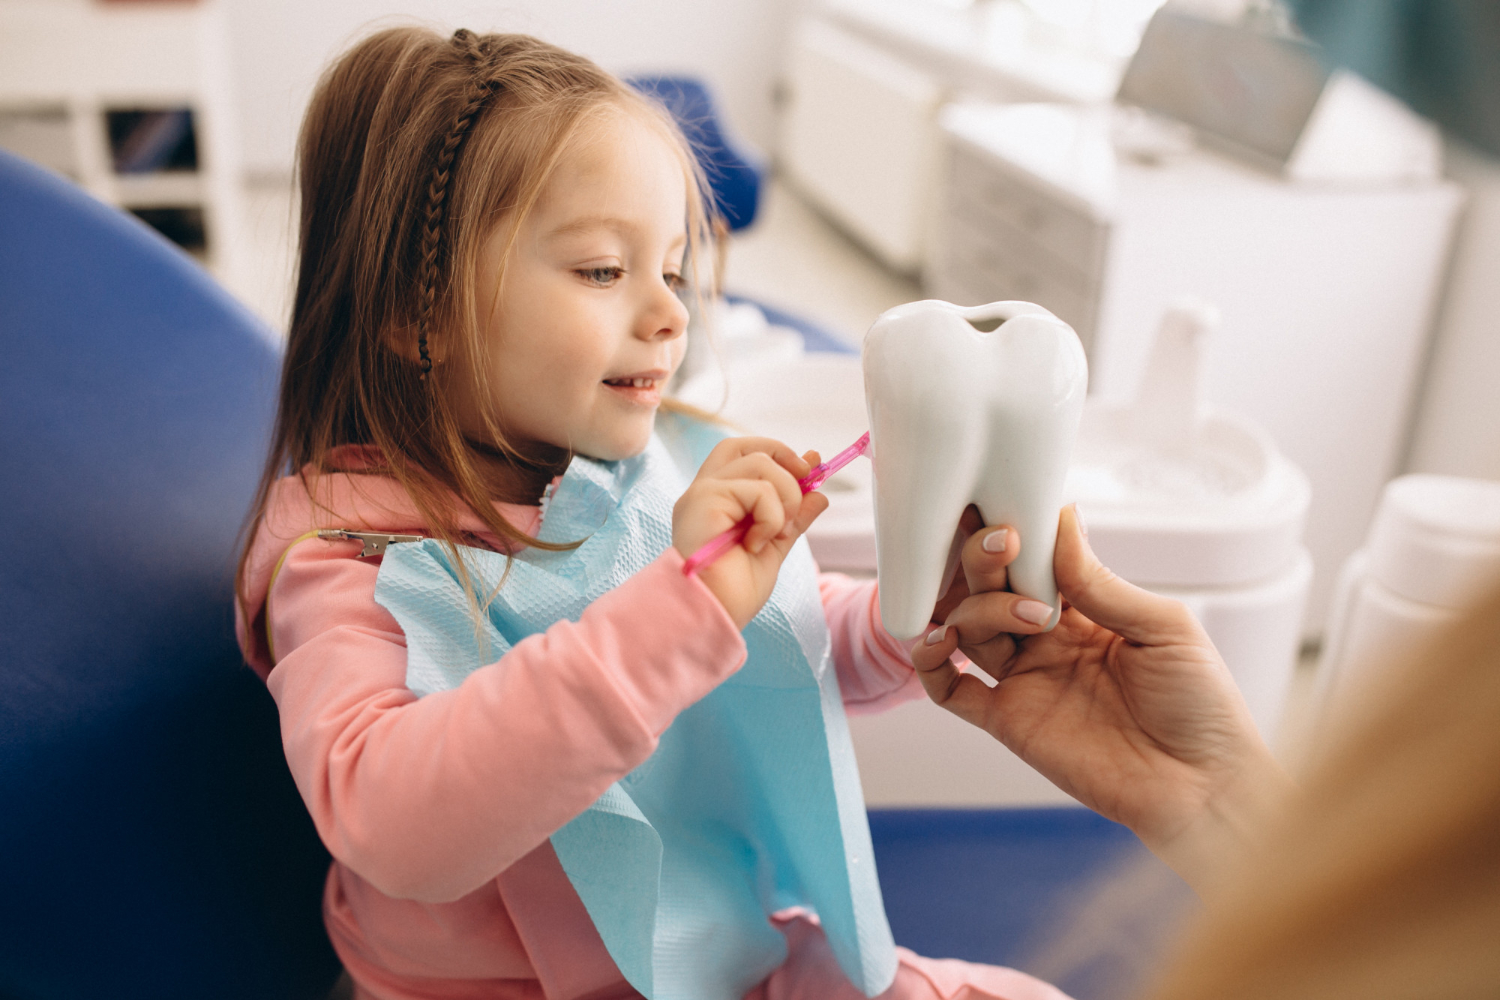 Pediatric Tooth Extraction - When Is It Necessary and How to Prepare Your Child